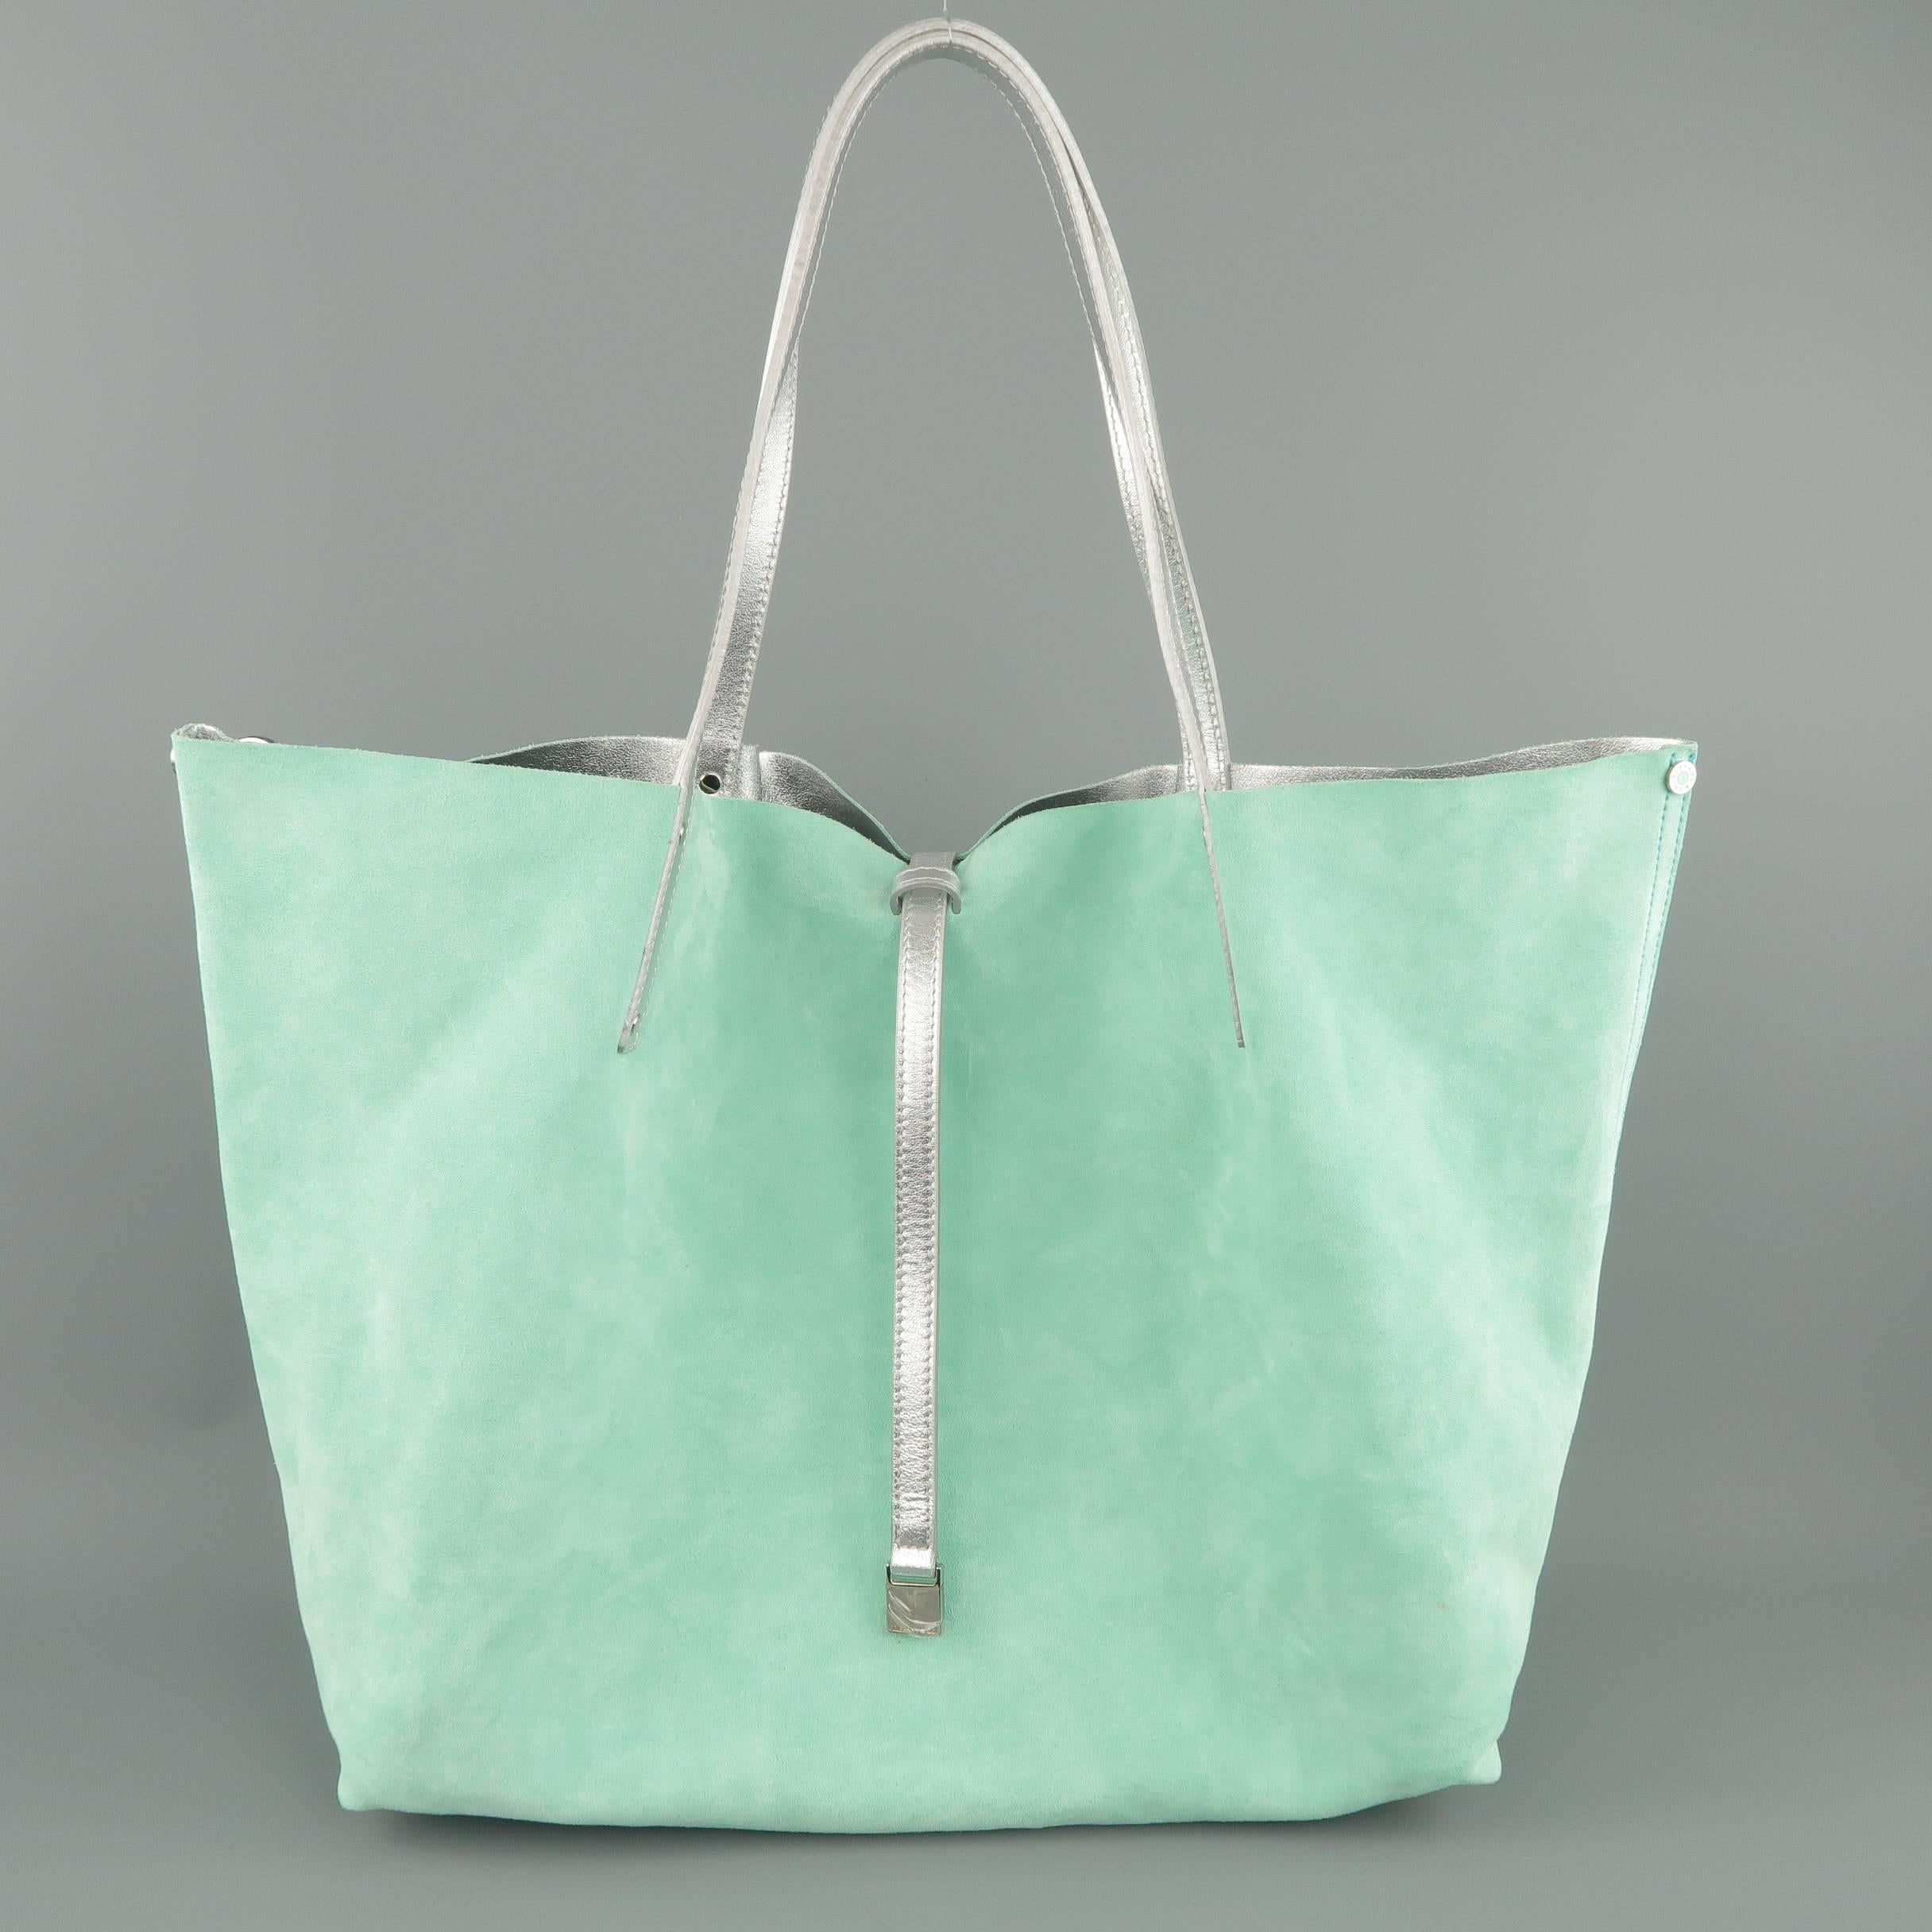 TIFFANY & CO. Metallic Silver Leather & Blue Suede Reversible Shopper Tote Bag 2